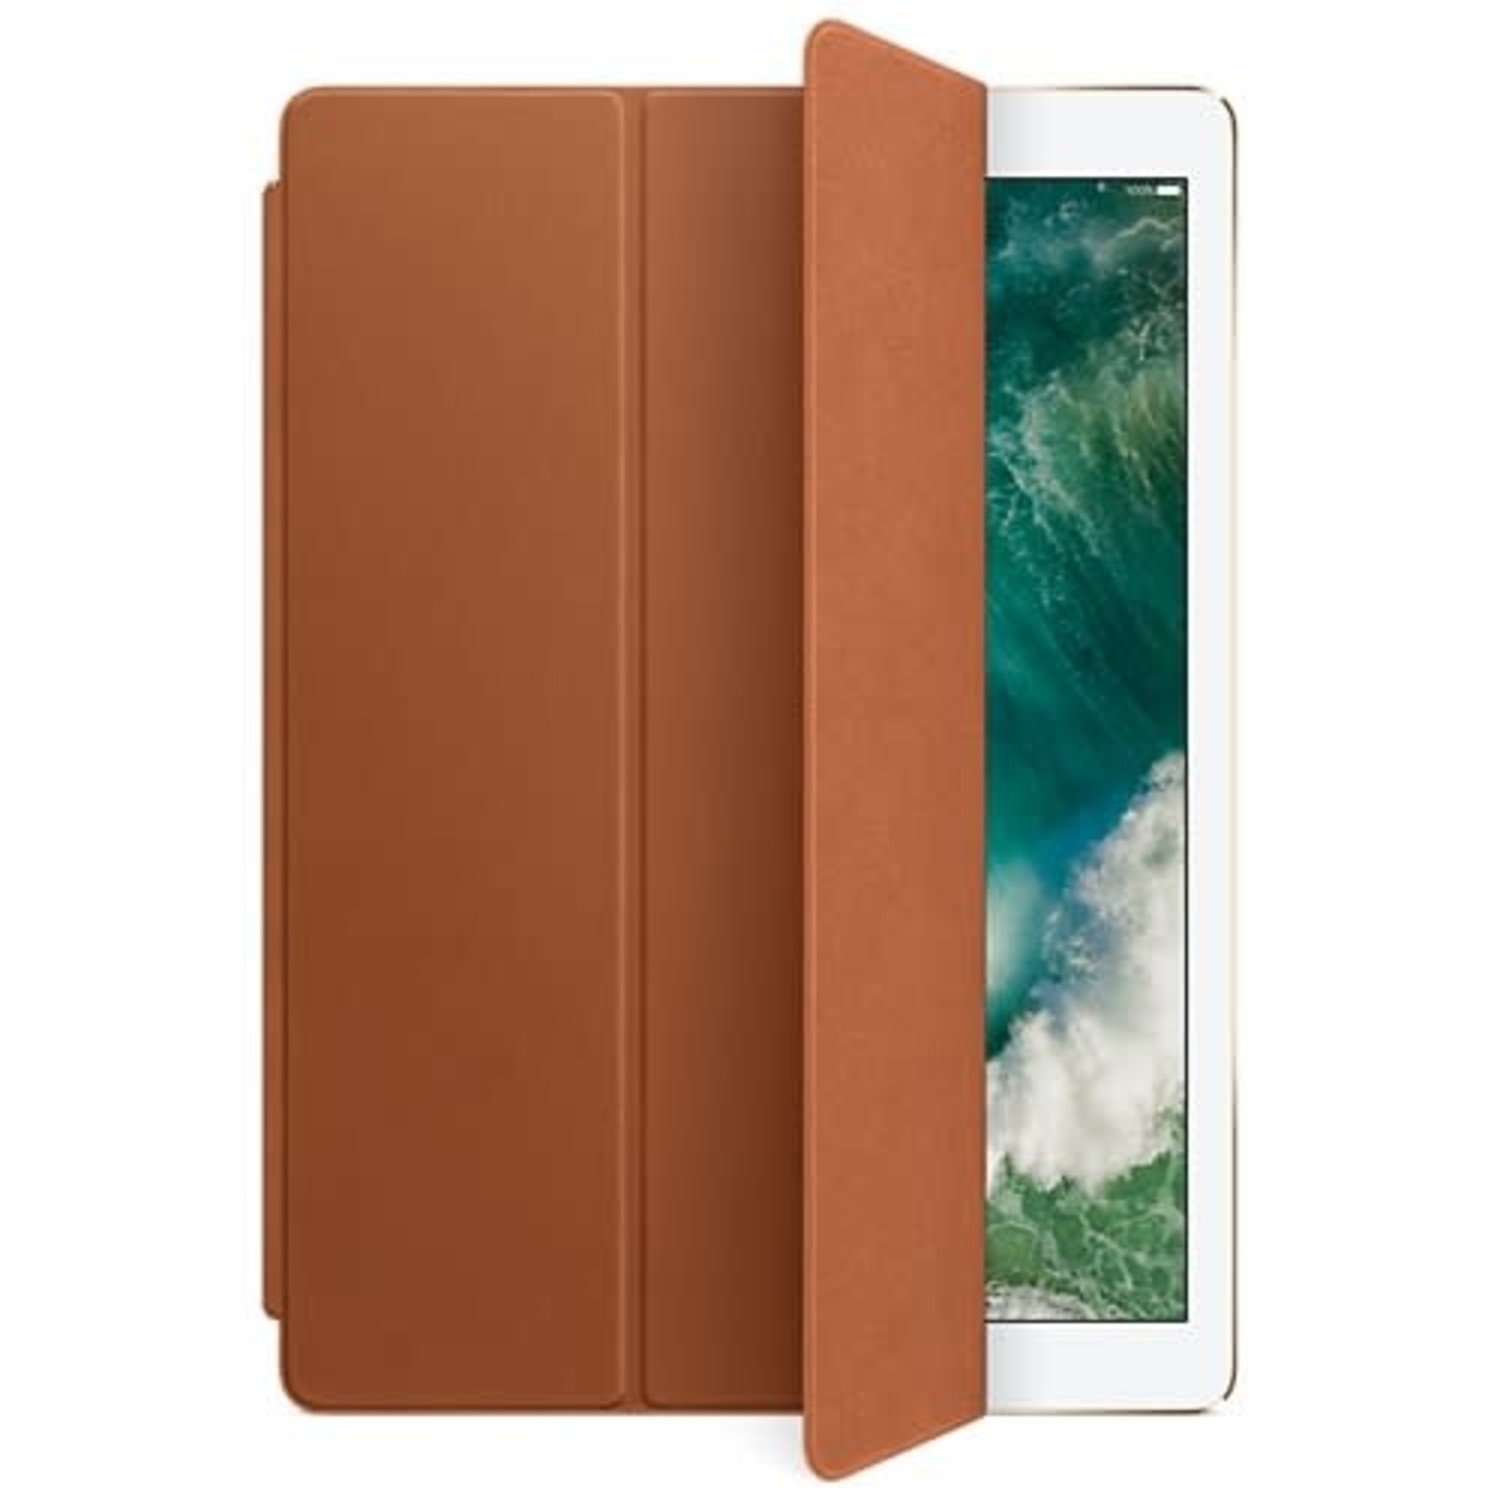 Leather Smart Cover for 12.9-inch iPad Pro - Saddle Brown - EOL